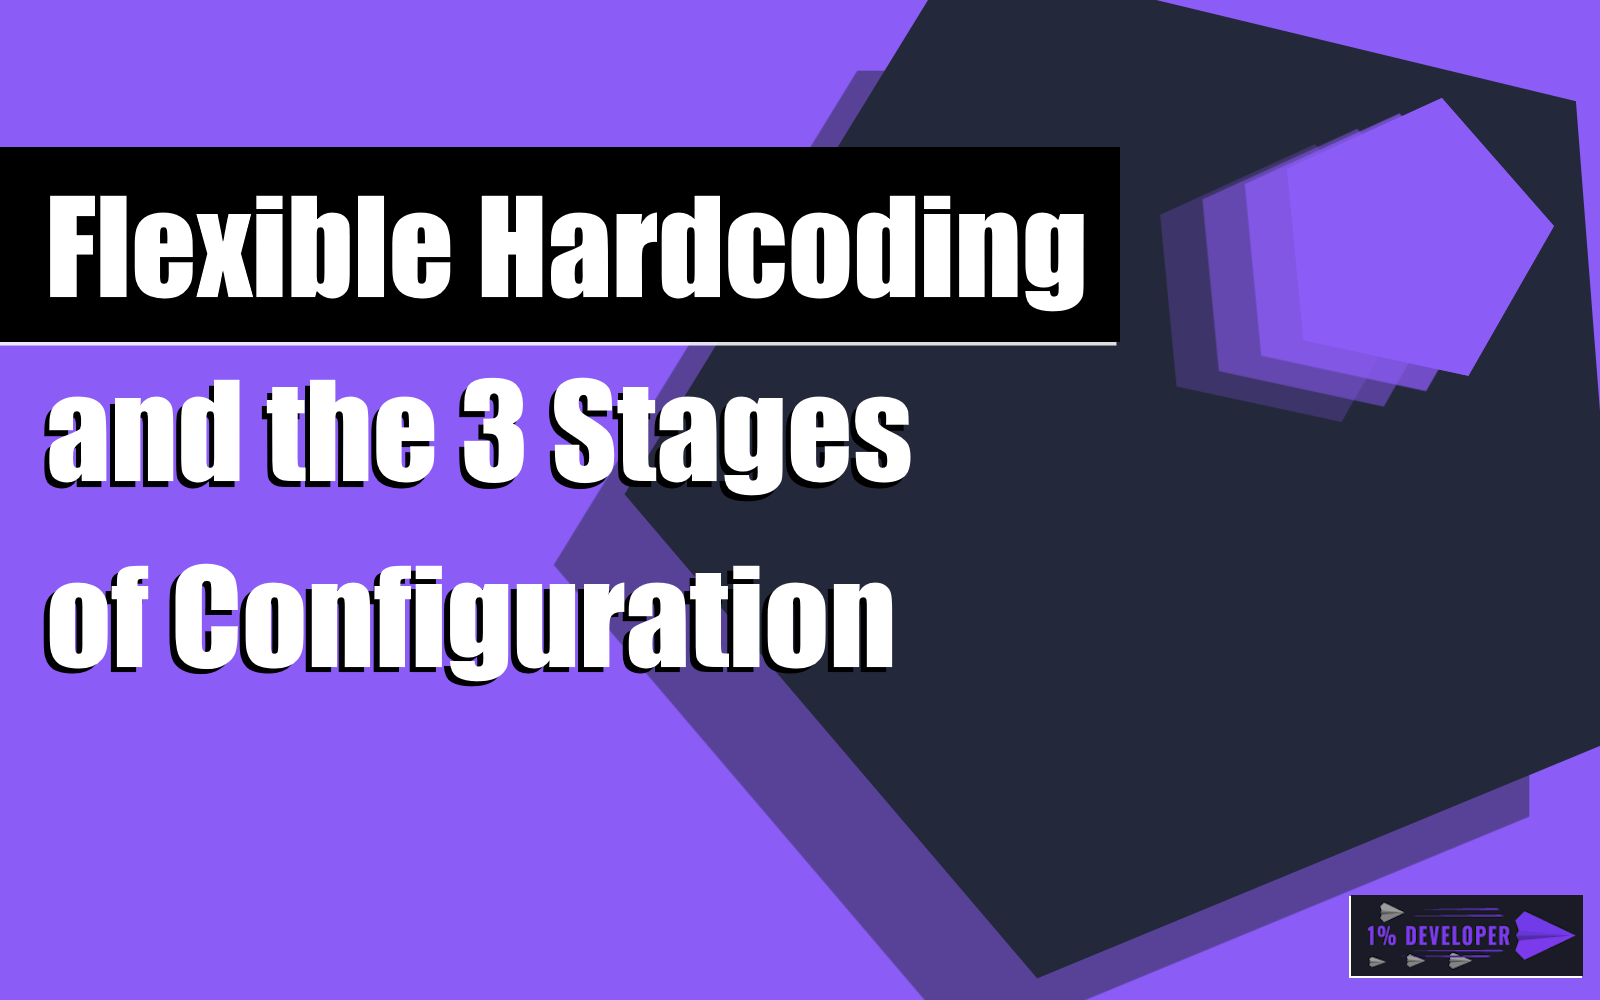 Flexible Hardcoding and the 3 Stages of Configuration